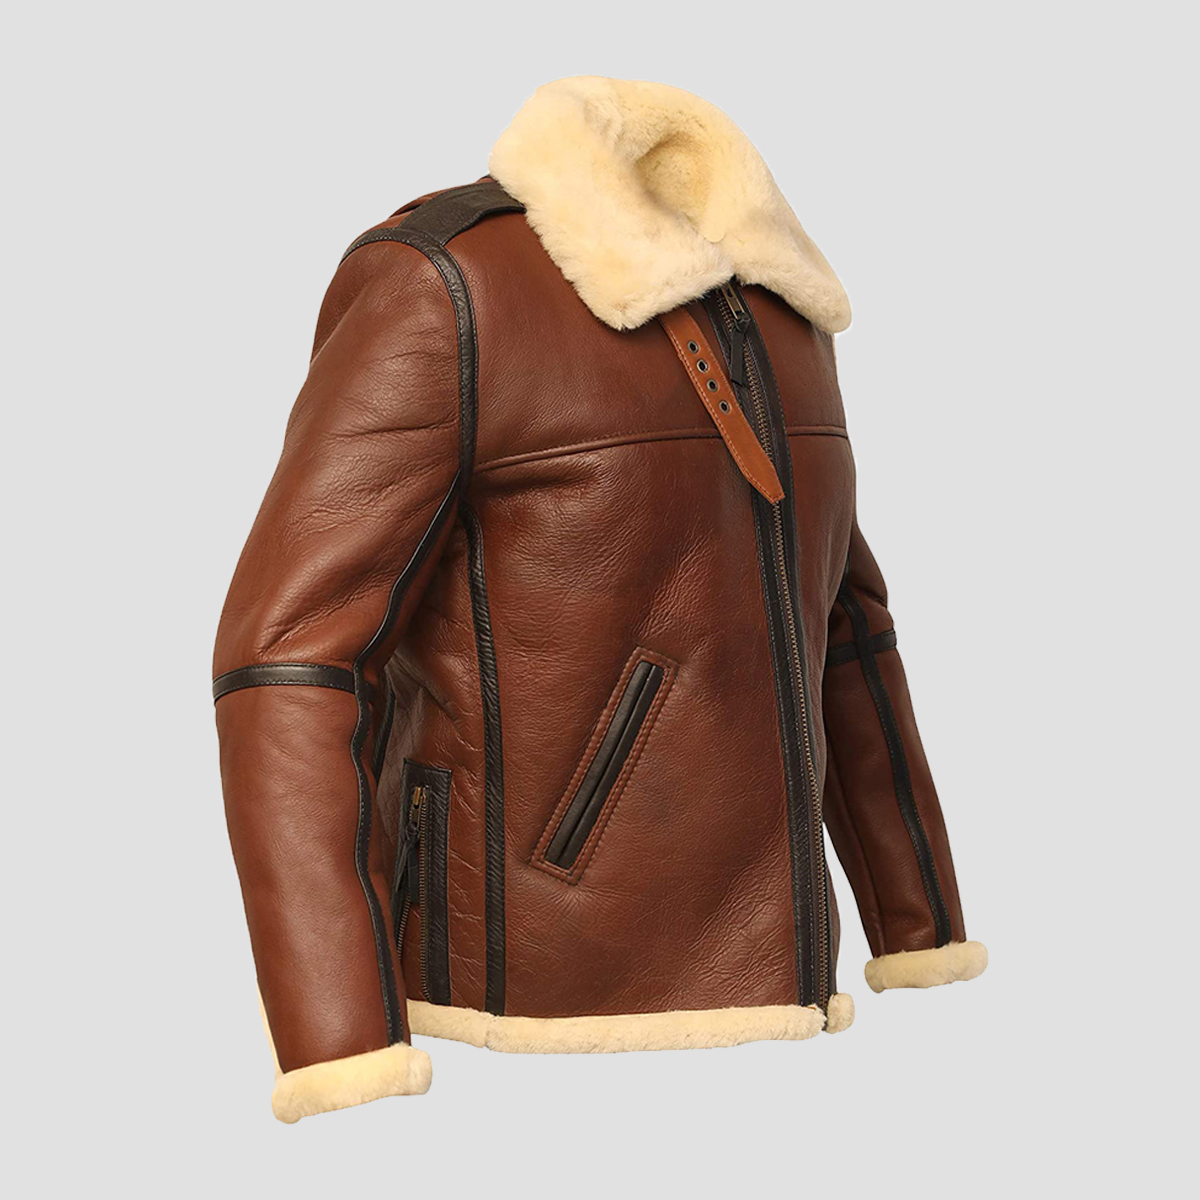 Aviator B-3 Brown Leather Bomber Jacket - The Vintage Leather